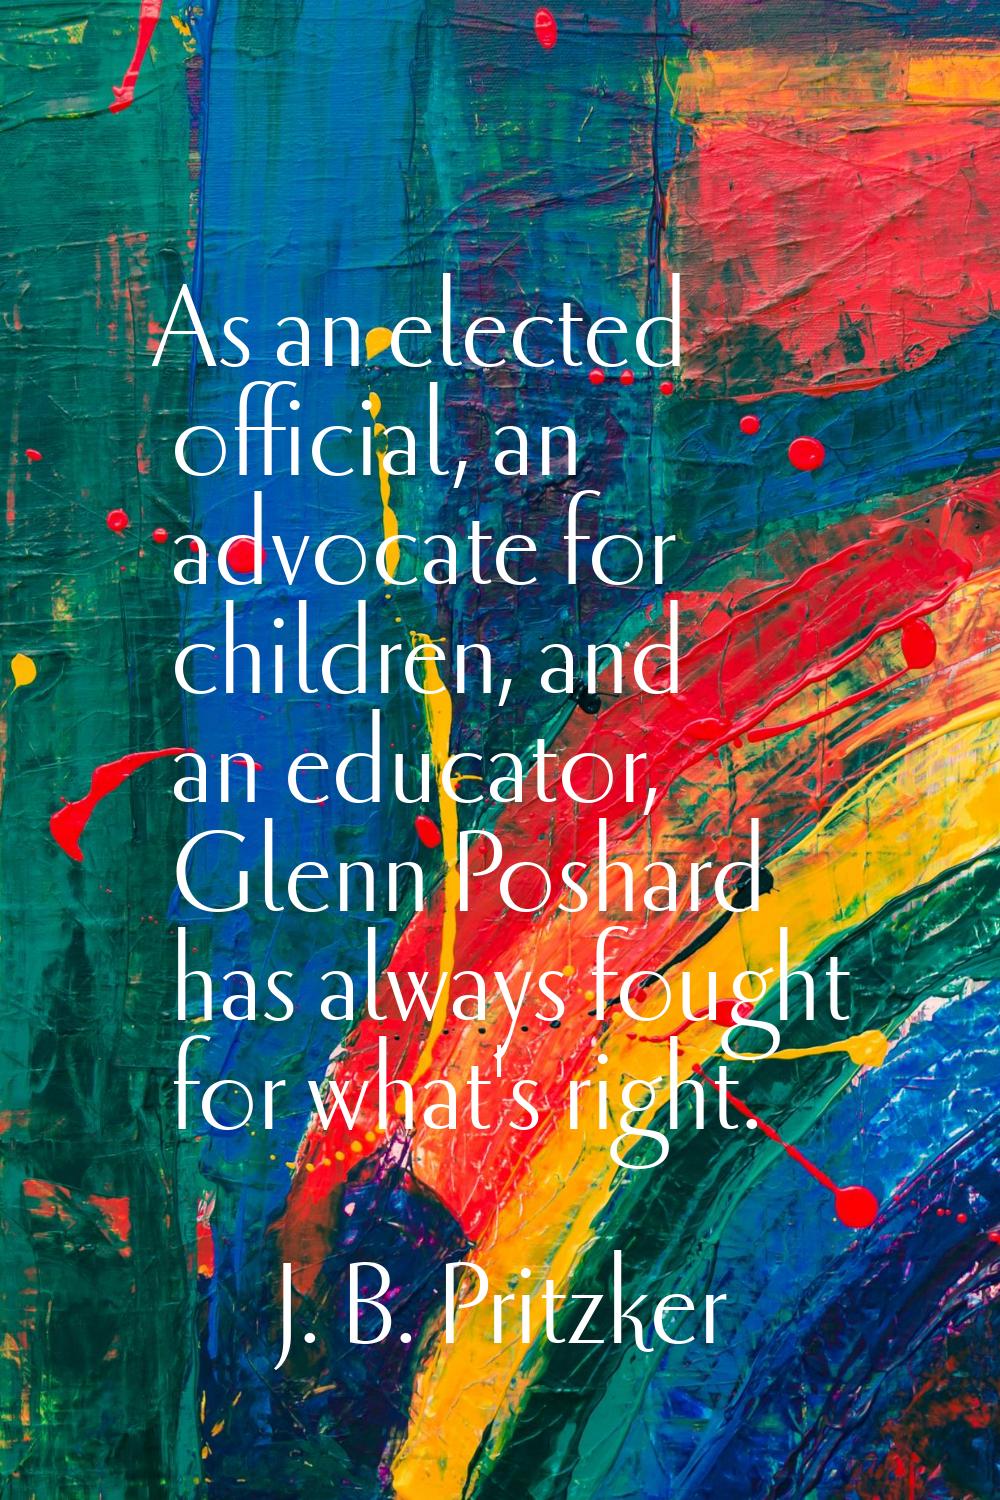 As an elected official, an advocate for children, and an educator, Glenn Poshard has always fought 